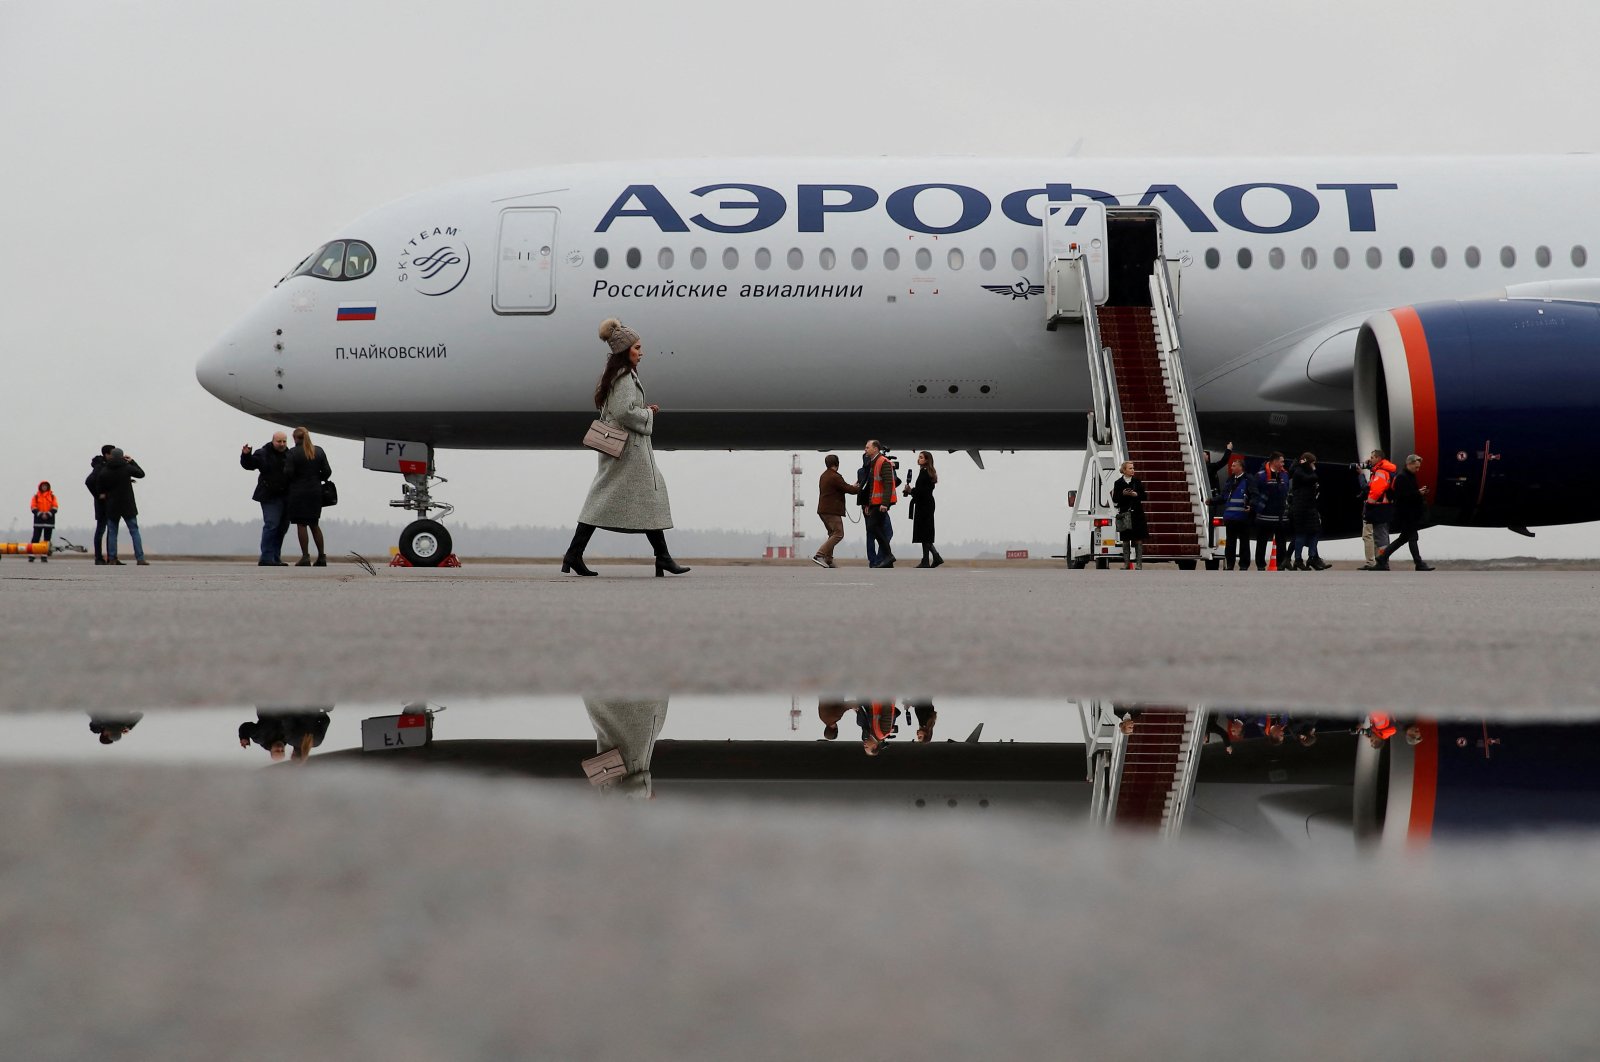 A view shows the first Airbus A350-900 aircraft of Russia&#039;s flagship airline Aeroflot during a media presentation at Sheremetyevo International Airport outside Moscow, Russia, March 4, 2020. (Reuters File Photo)